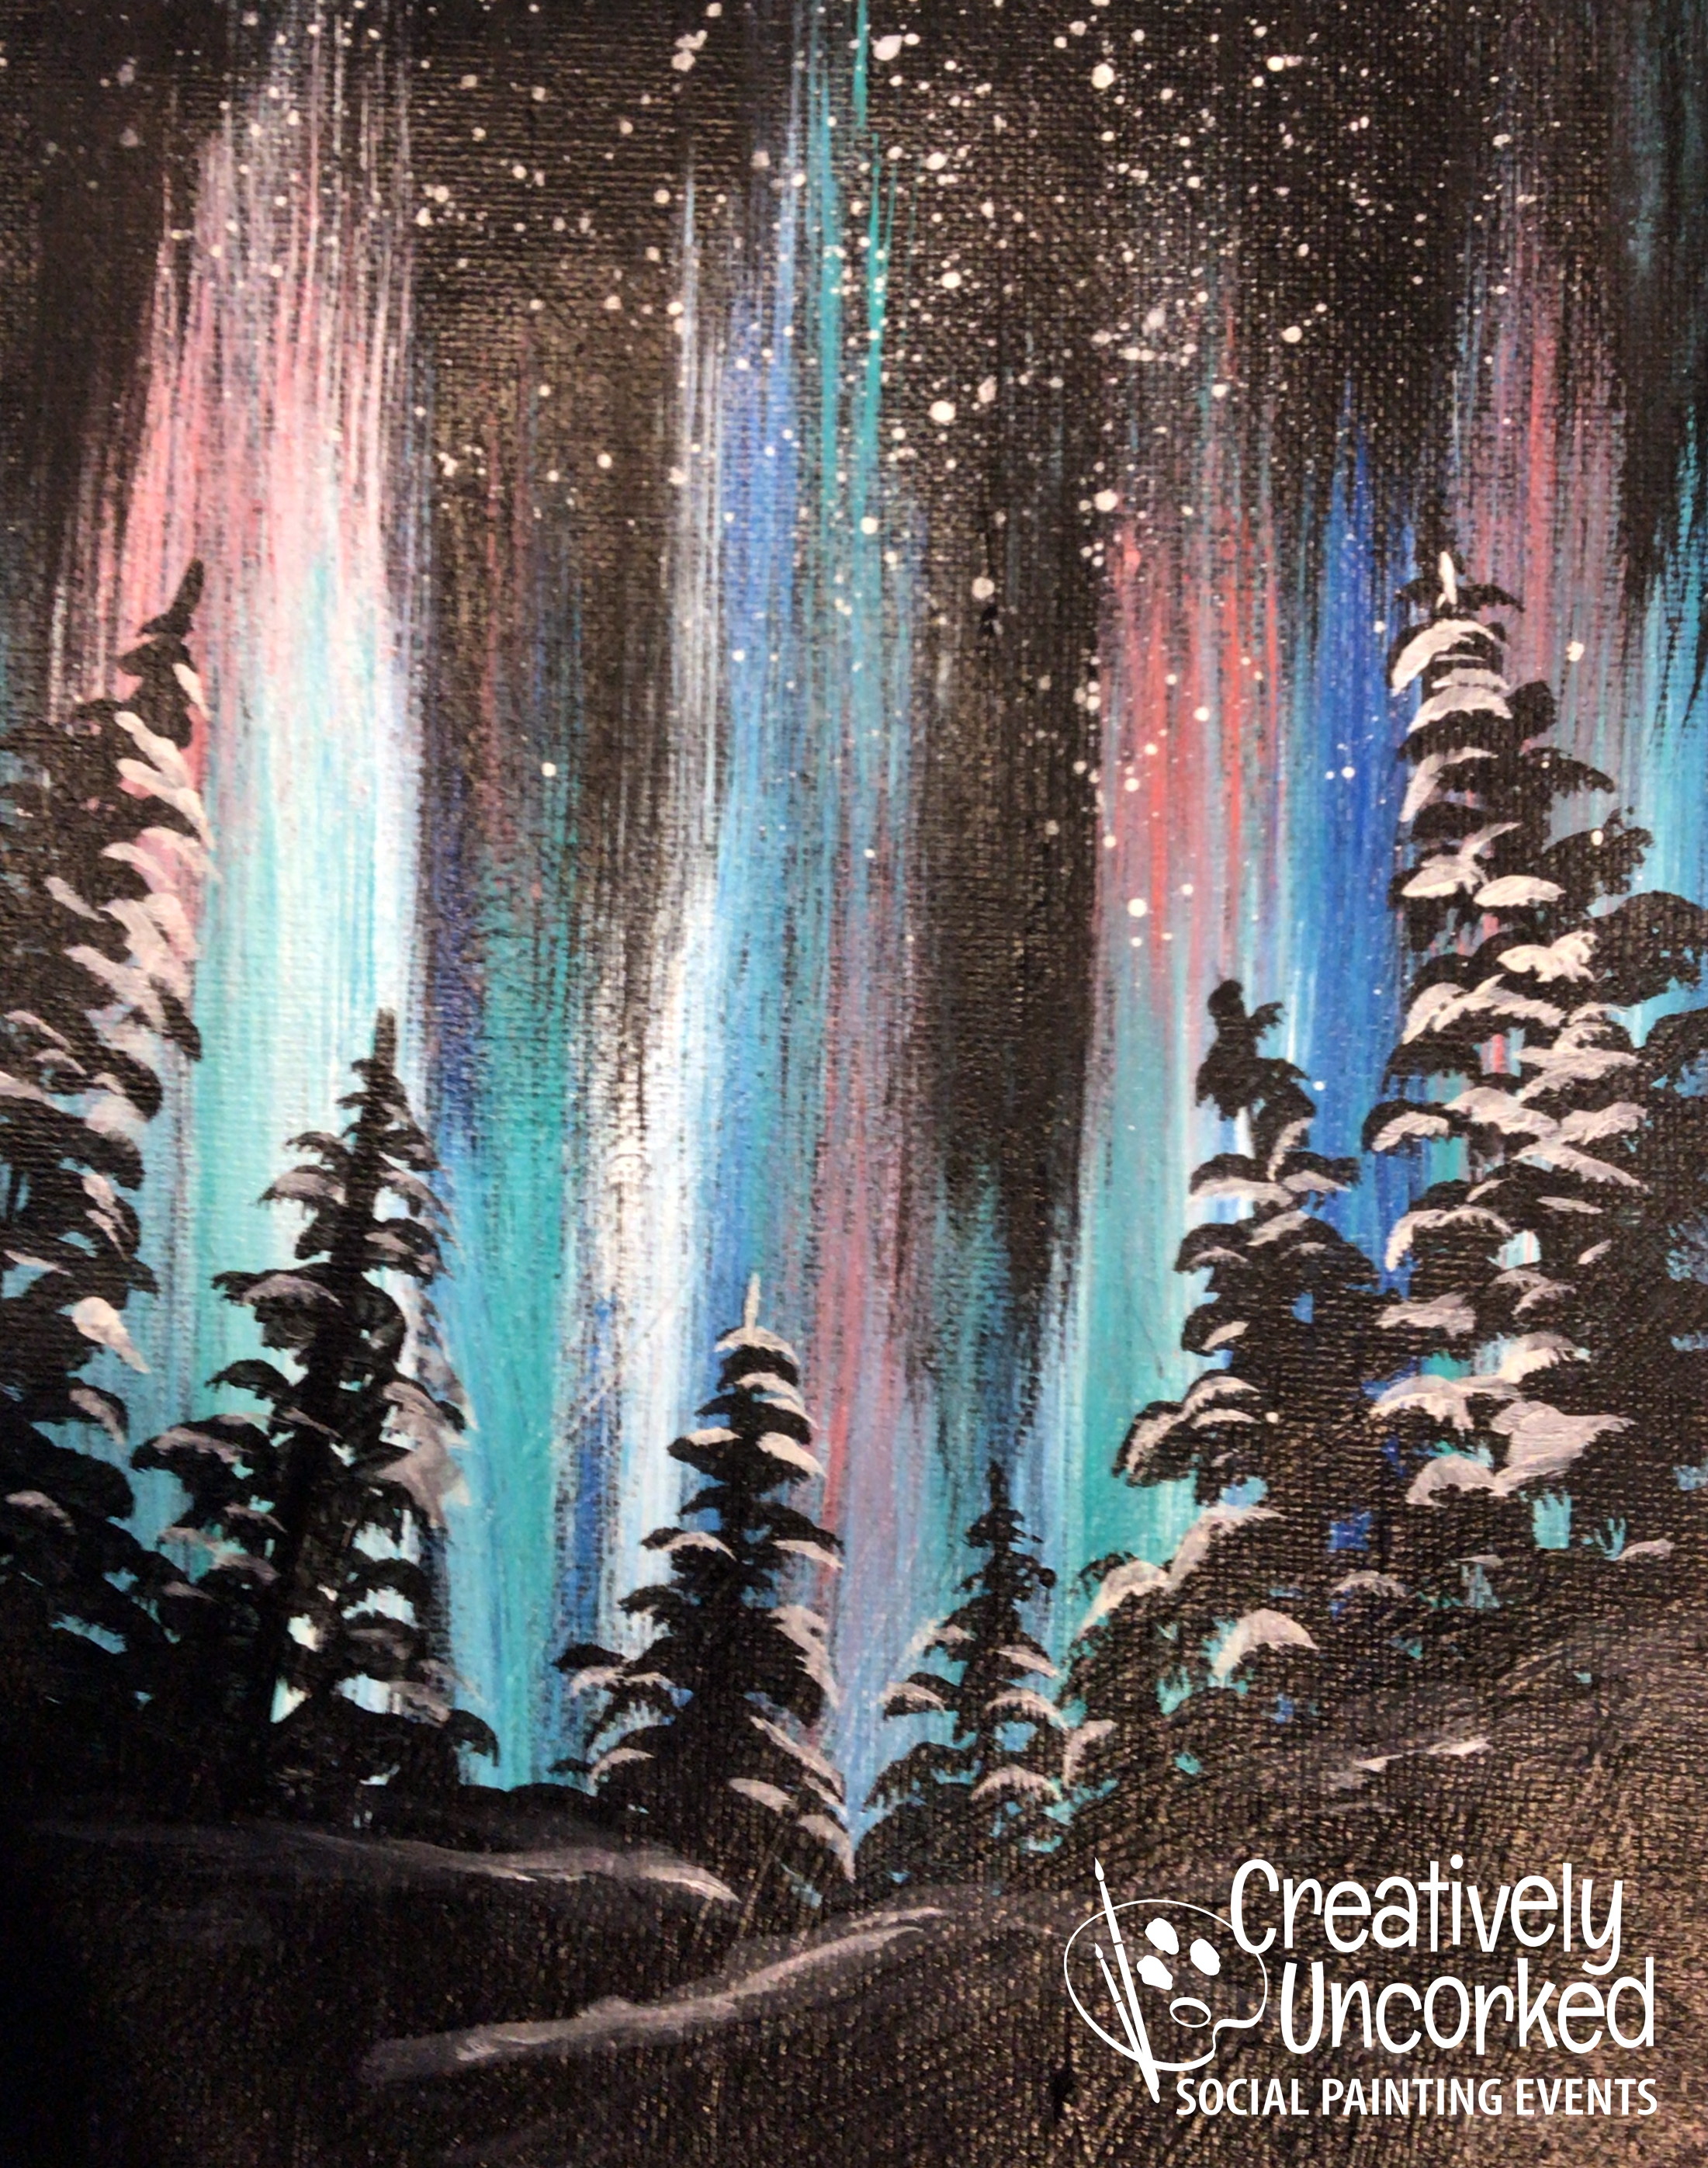 Aurora Borealis by Creatively Uncorked http://creativelyuncorked.com/